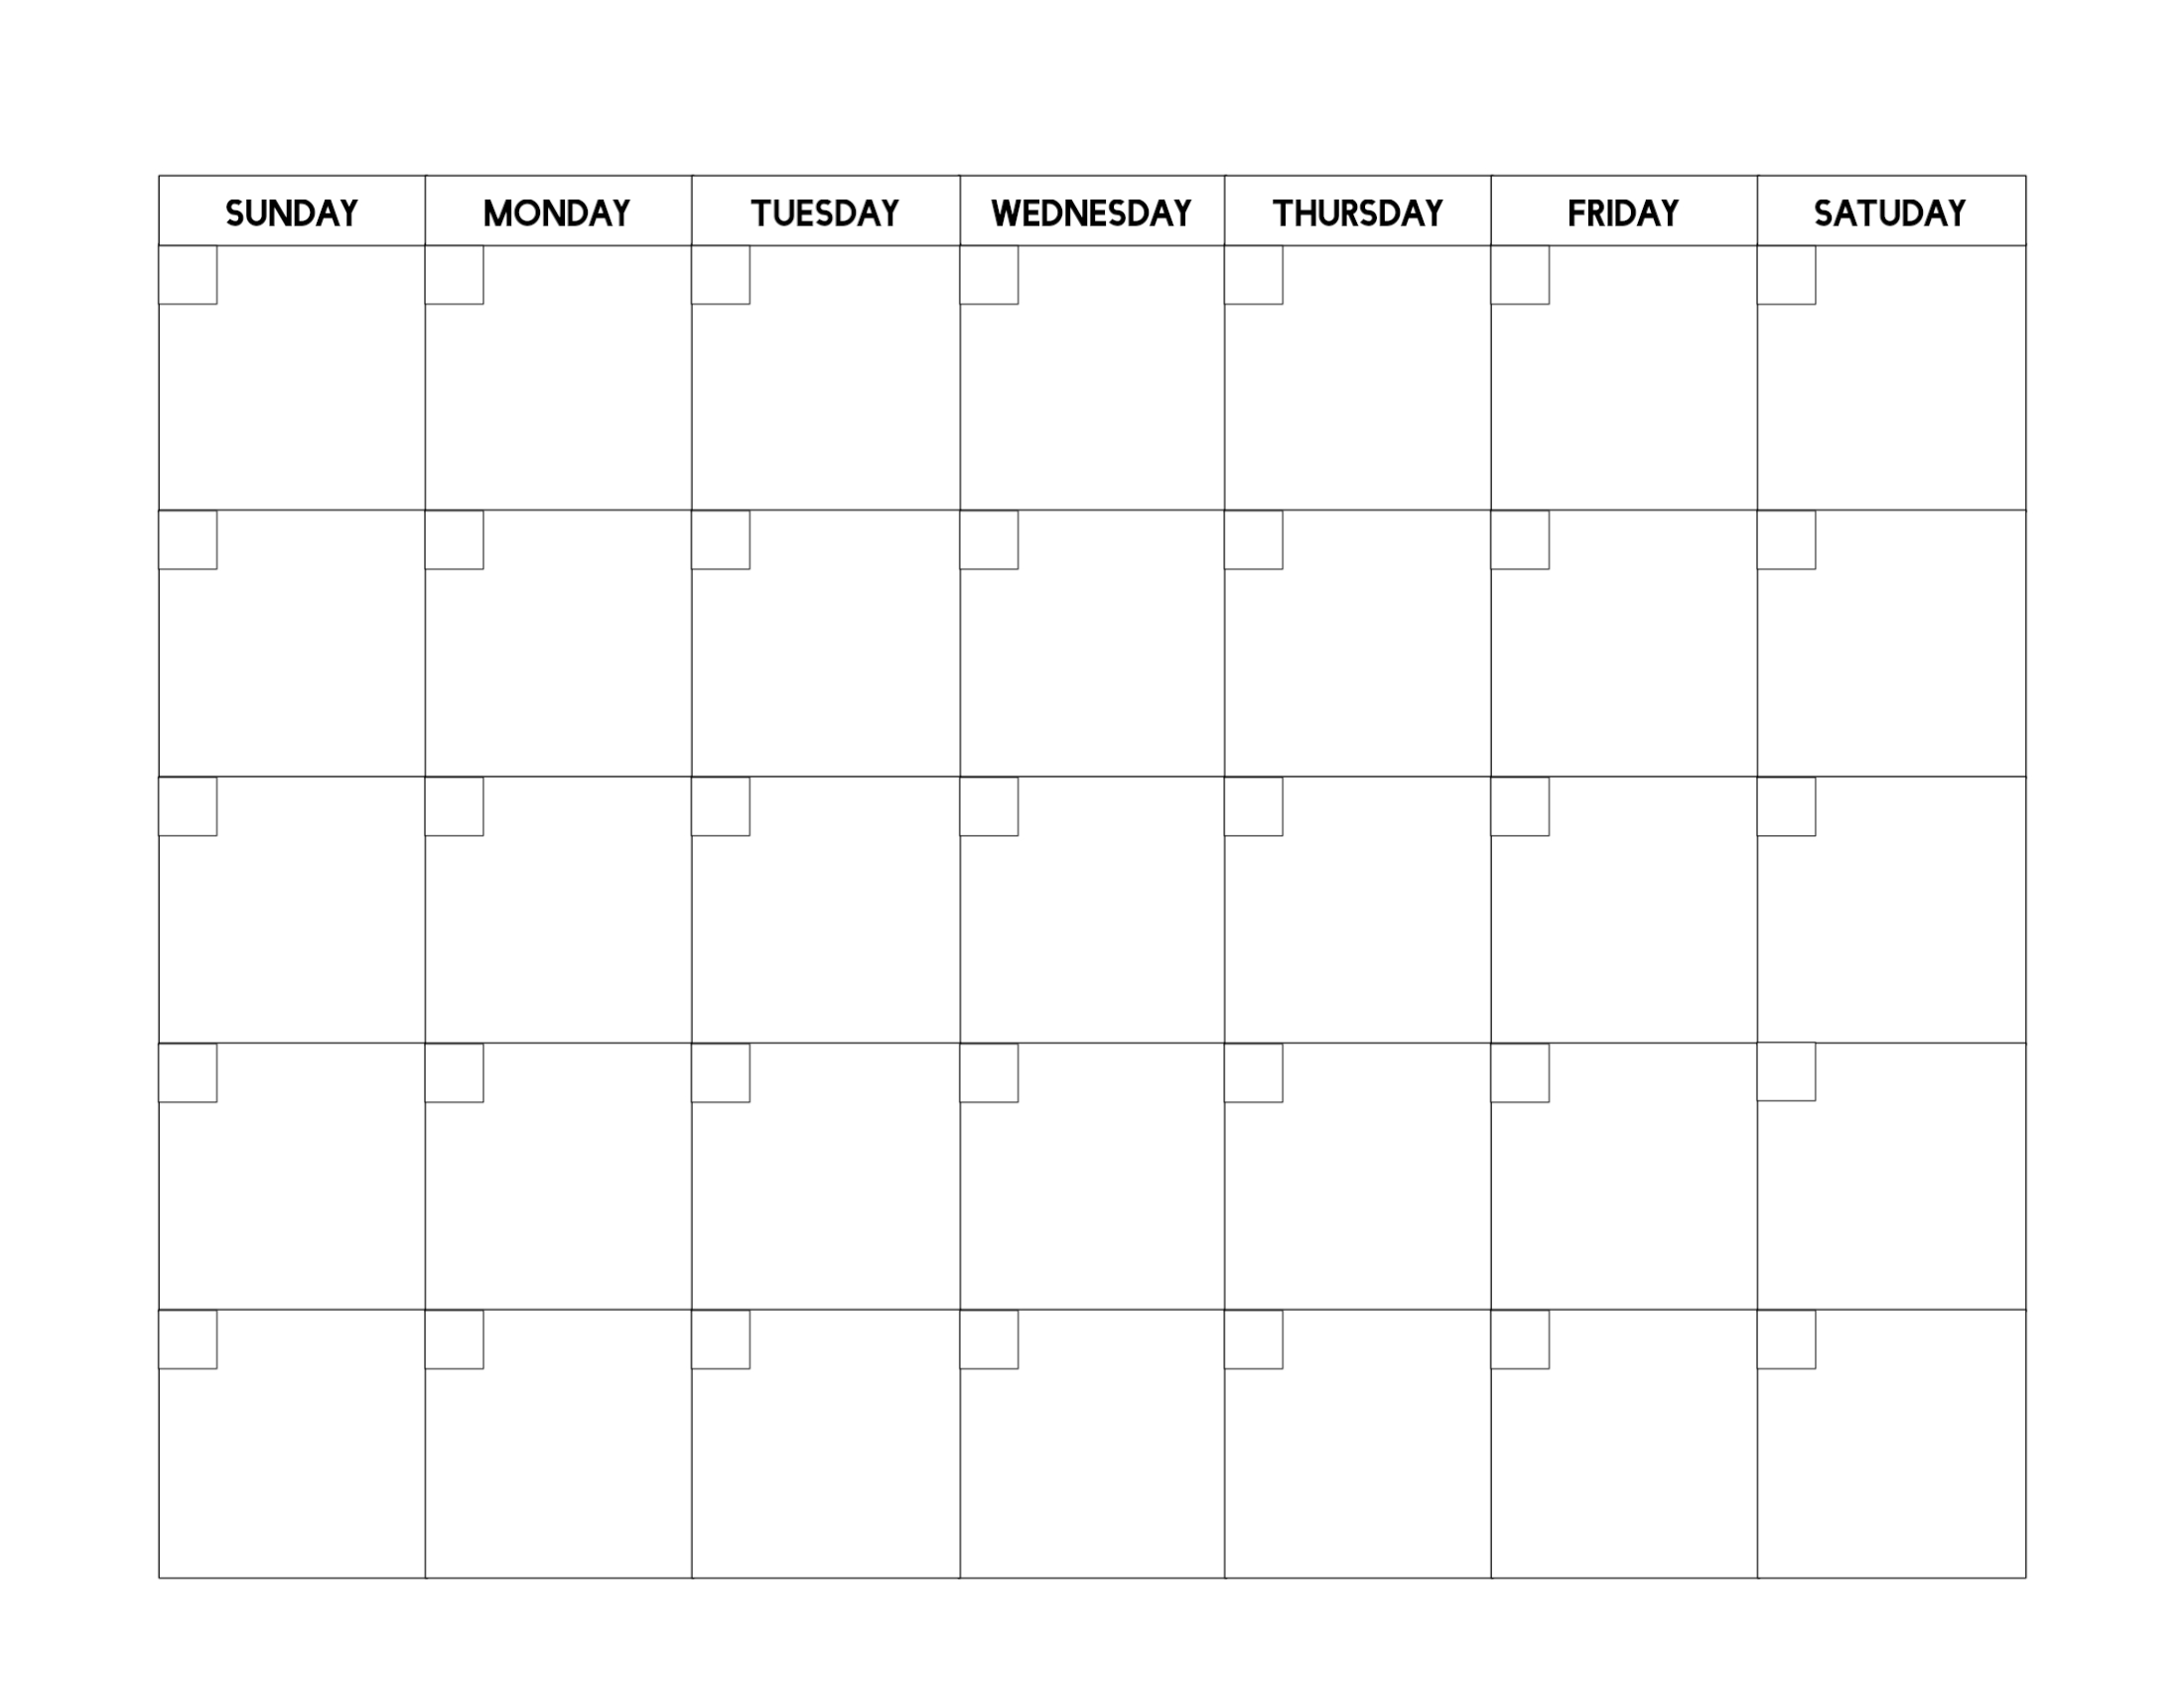 Free Printable Blank Calendar Template - Paper Trail Design With Blank Calender Template